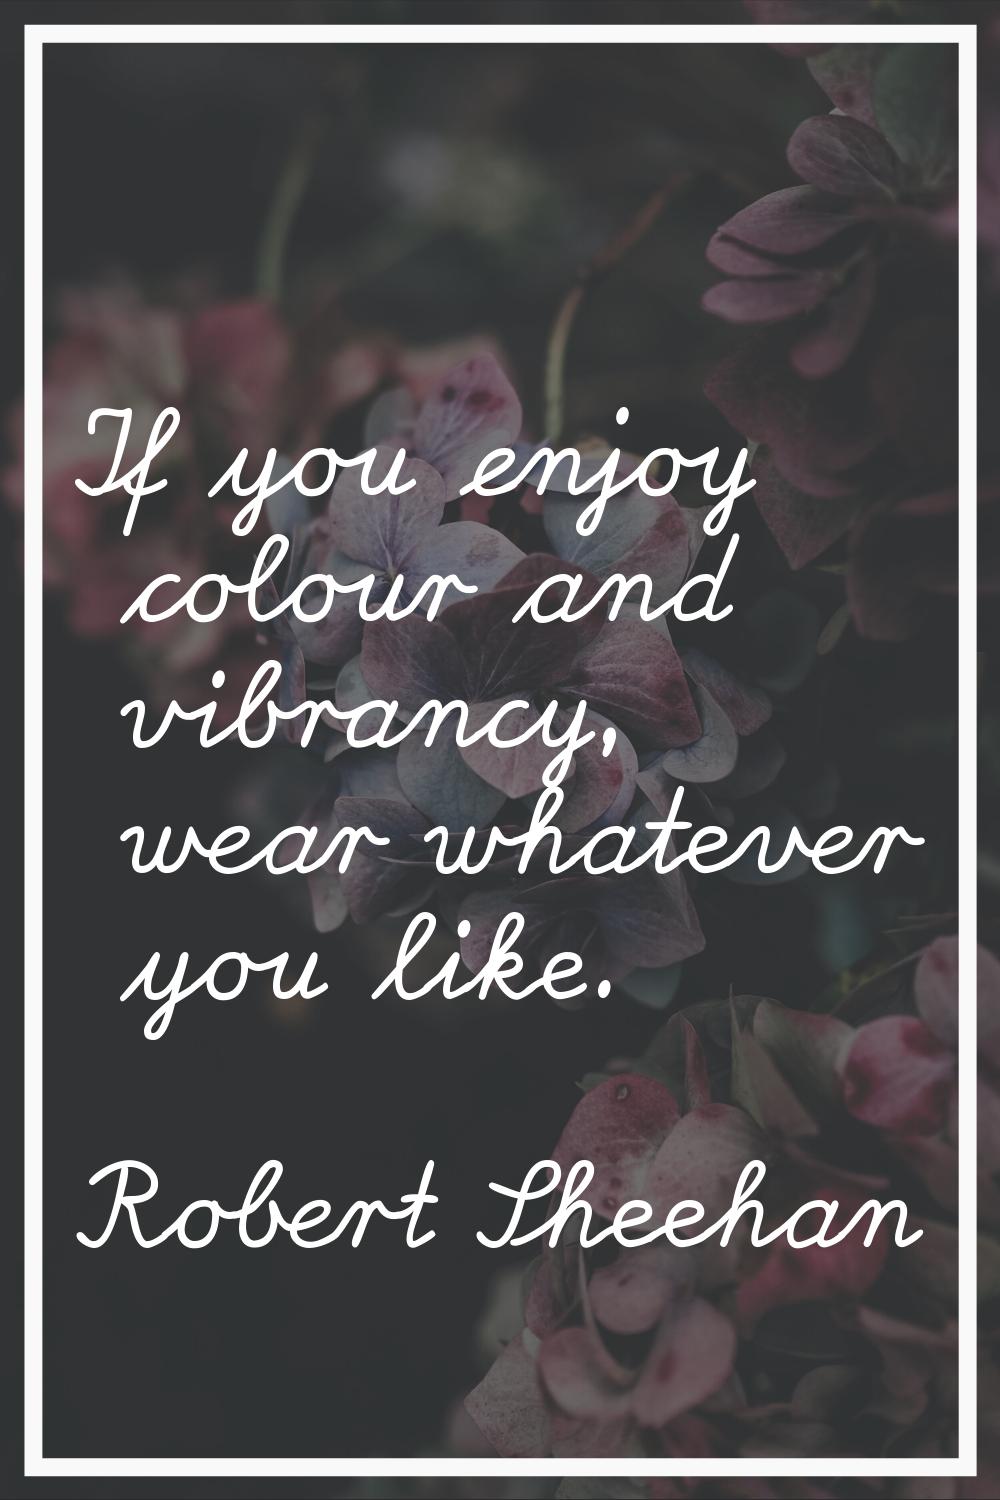 If you enjoy colour and vibrancy, wear whatever you like.